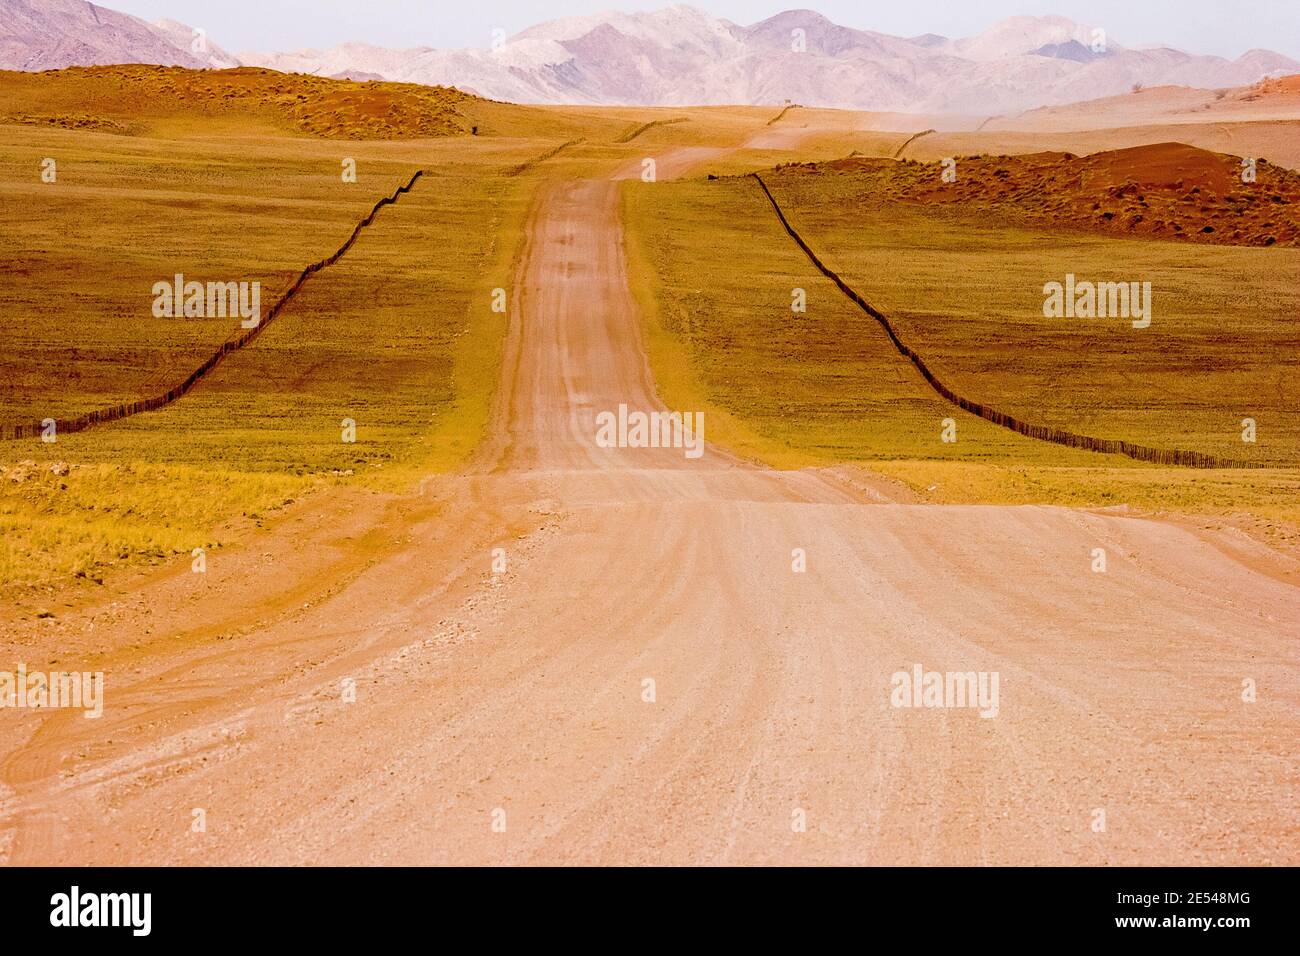 A gravel road in the picturesque landscape of Namibia. Stock Photo